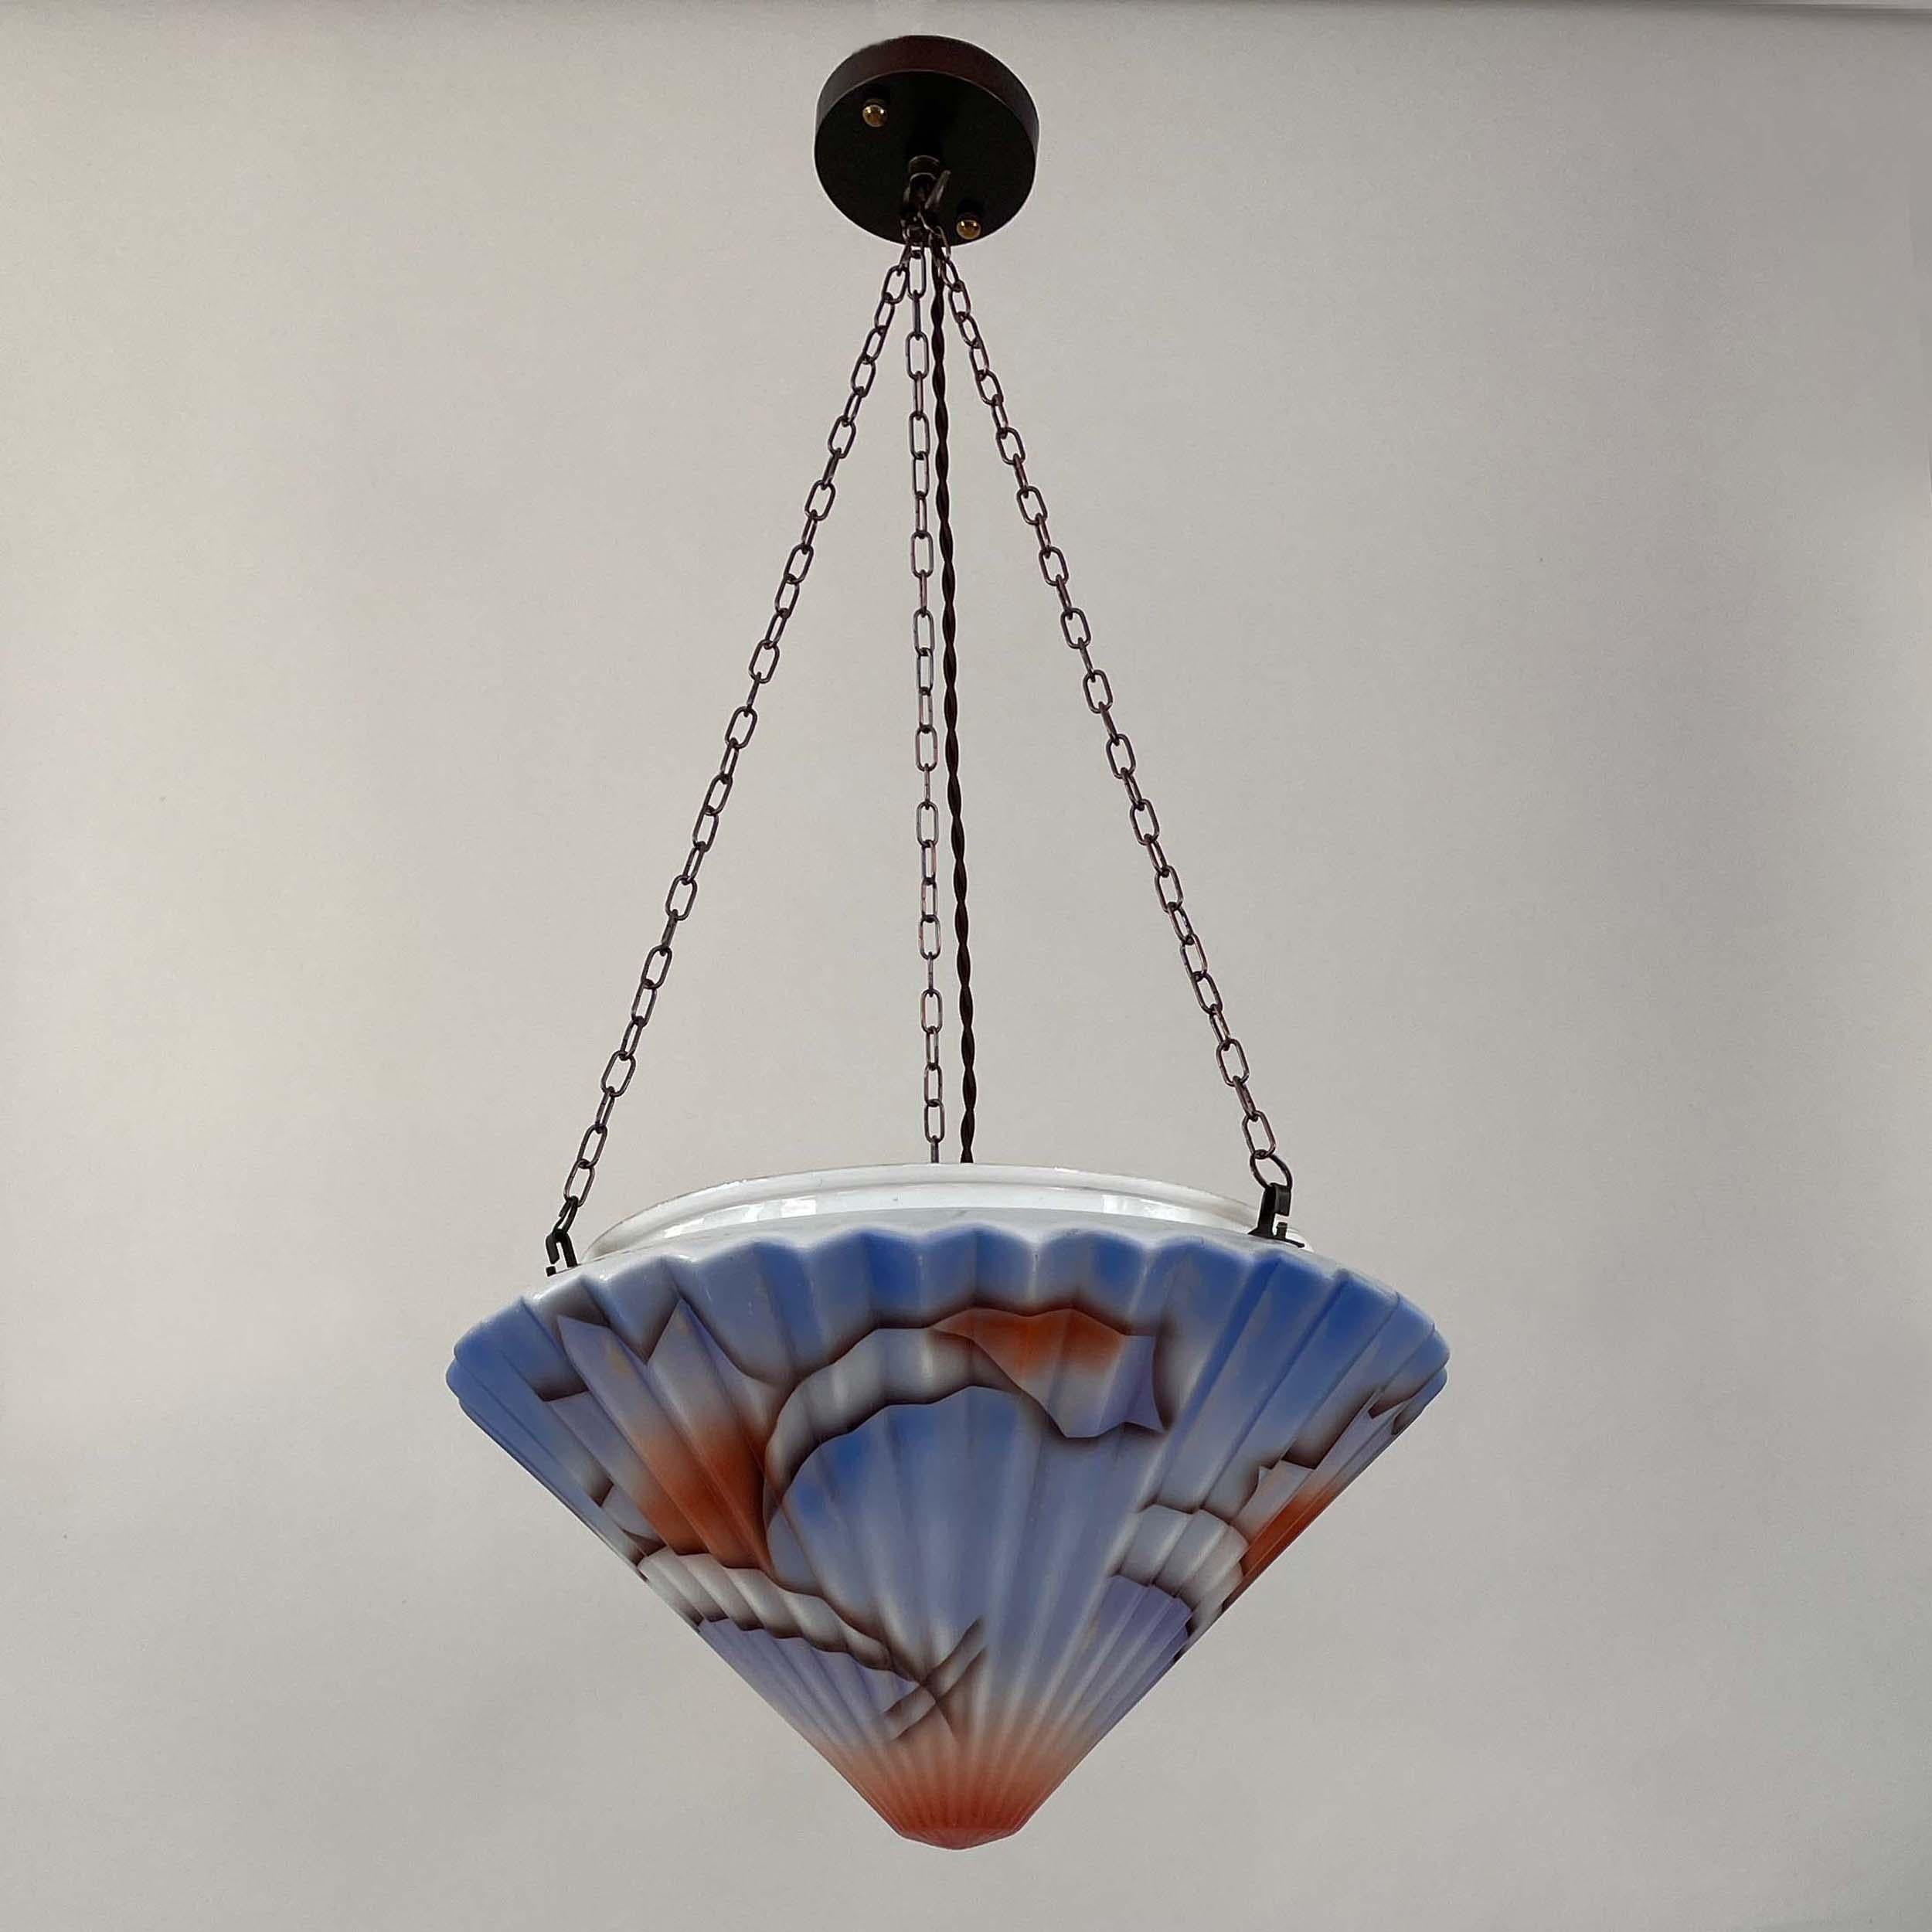 This rare Bauhaus inspired pendant was designed and manufactured in Germany in the late 1920s to early 1930s. It features an enameled glass lampshade and bronzed brass hardware. The colorful glass diffuser with typical splash decor pattern. 

Good